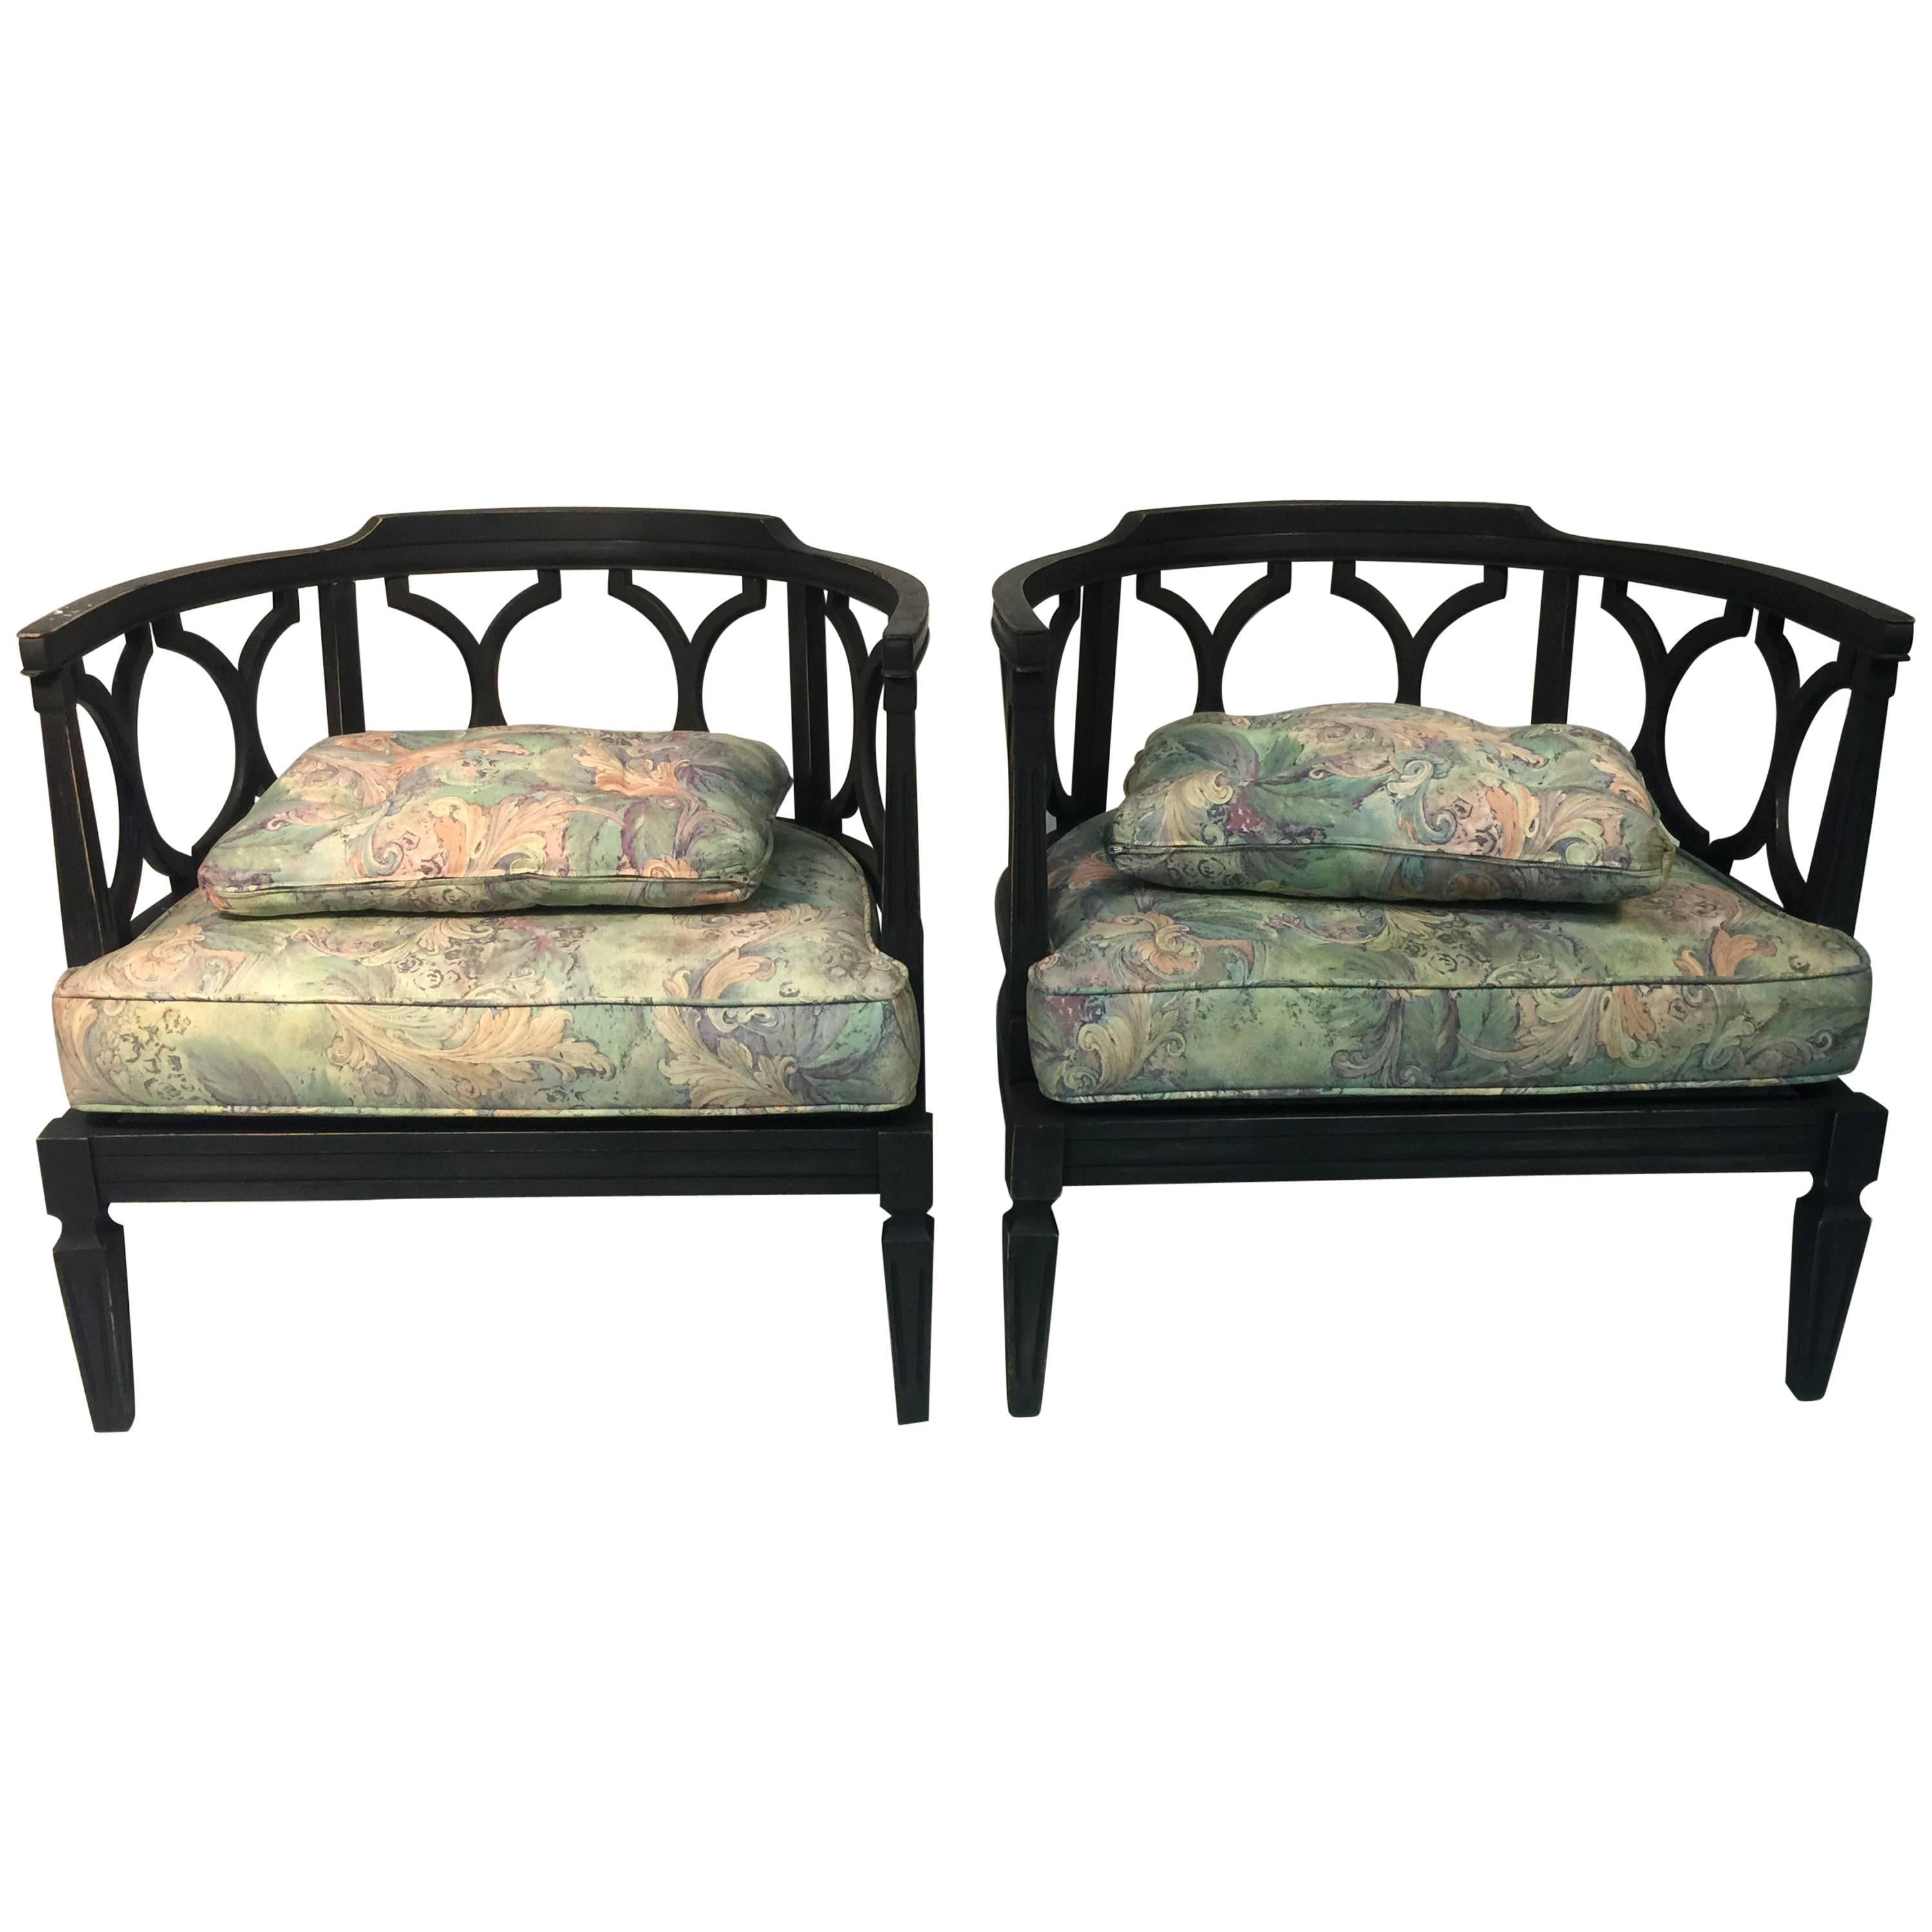 Pair of James Mont Style Asian Inspired Hollywood Regency Chairs For Sale